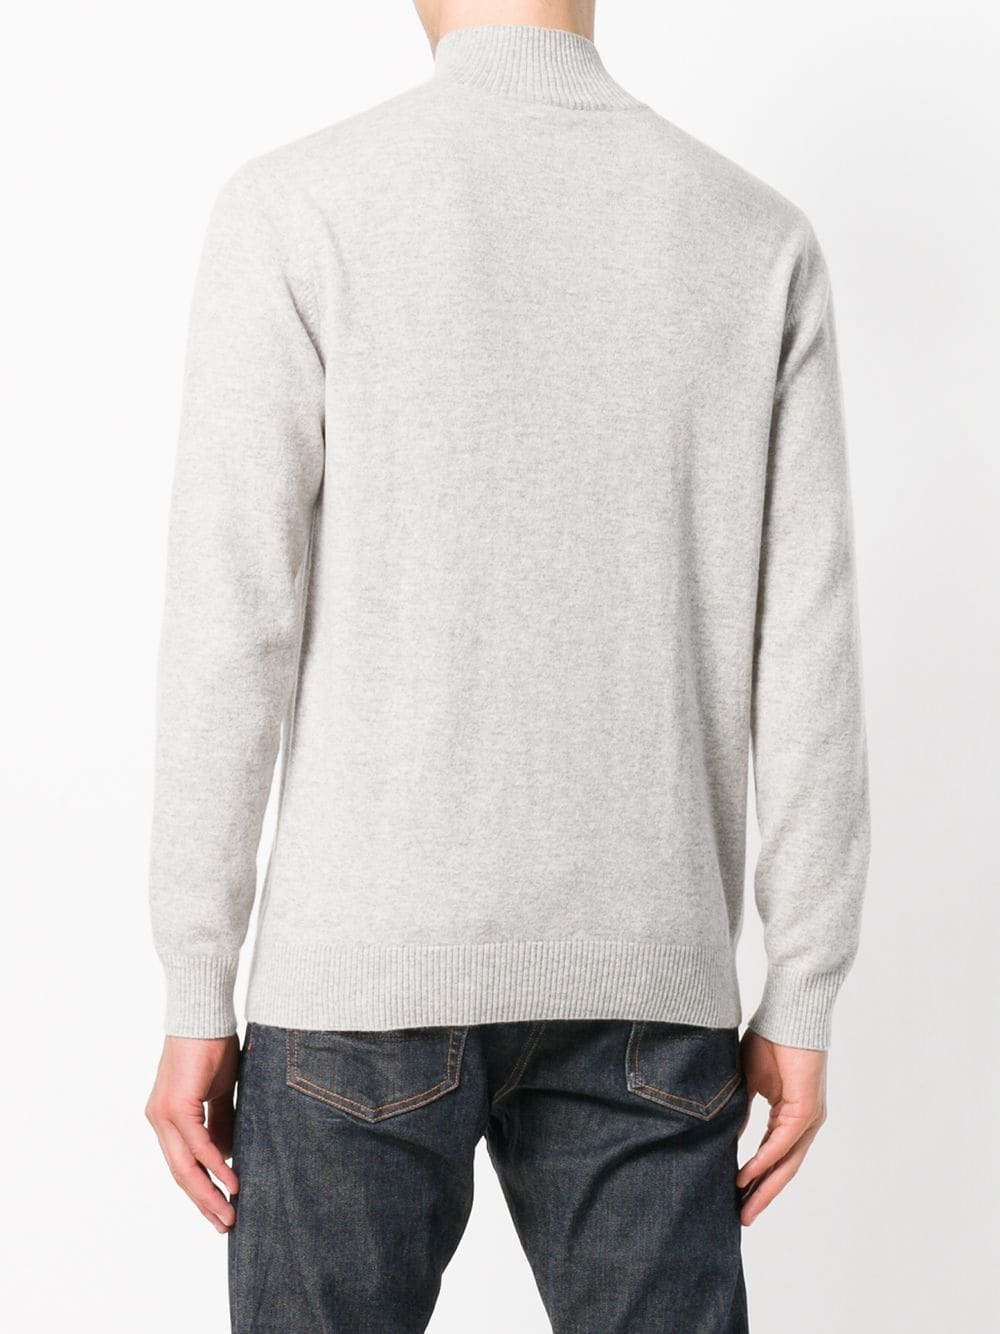 N.Peal Turtleneck Fitted Sweater, $281 | farfetch.com | Lookastic